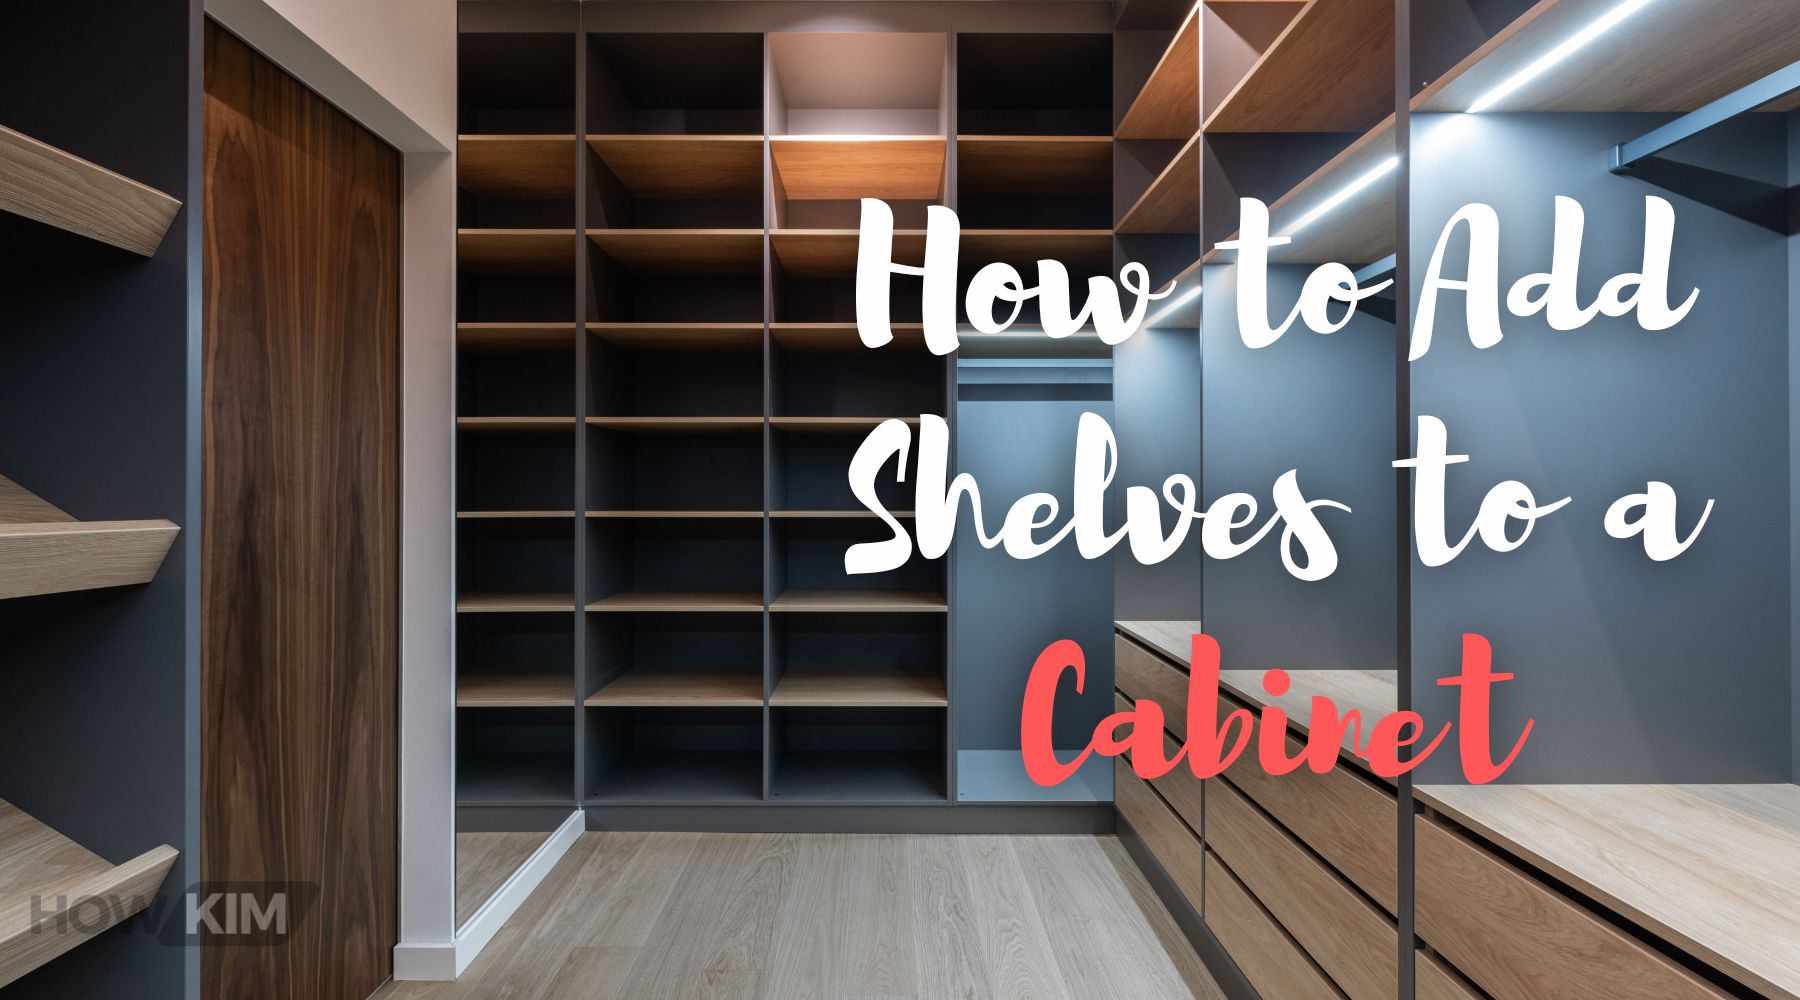 How to Add Shelves to a Cabinet